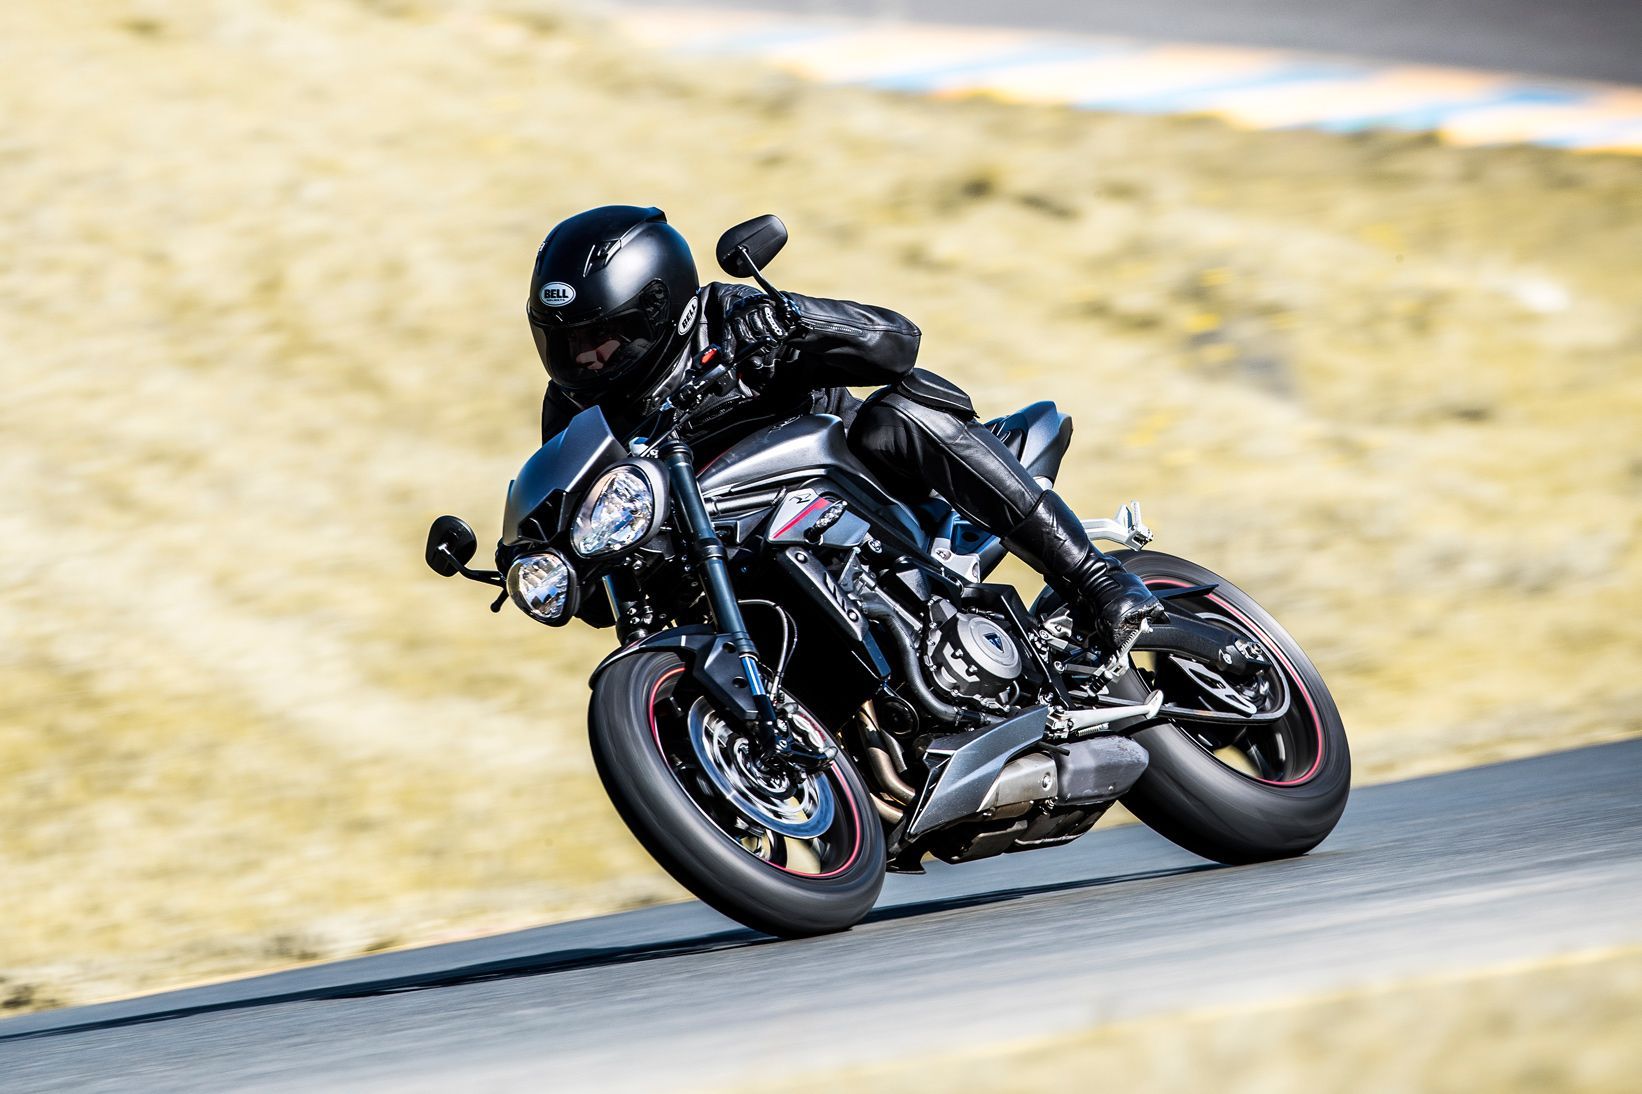 The new Street Triple in action